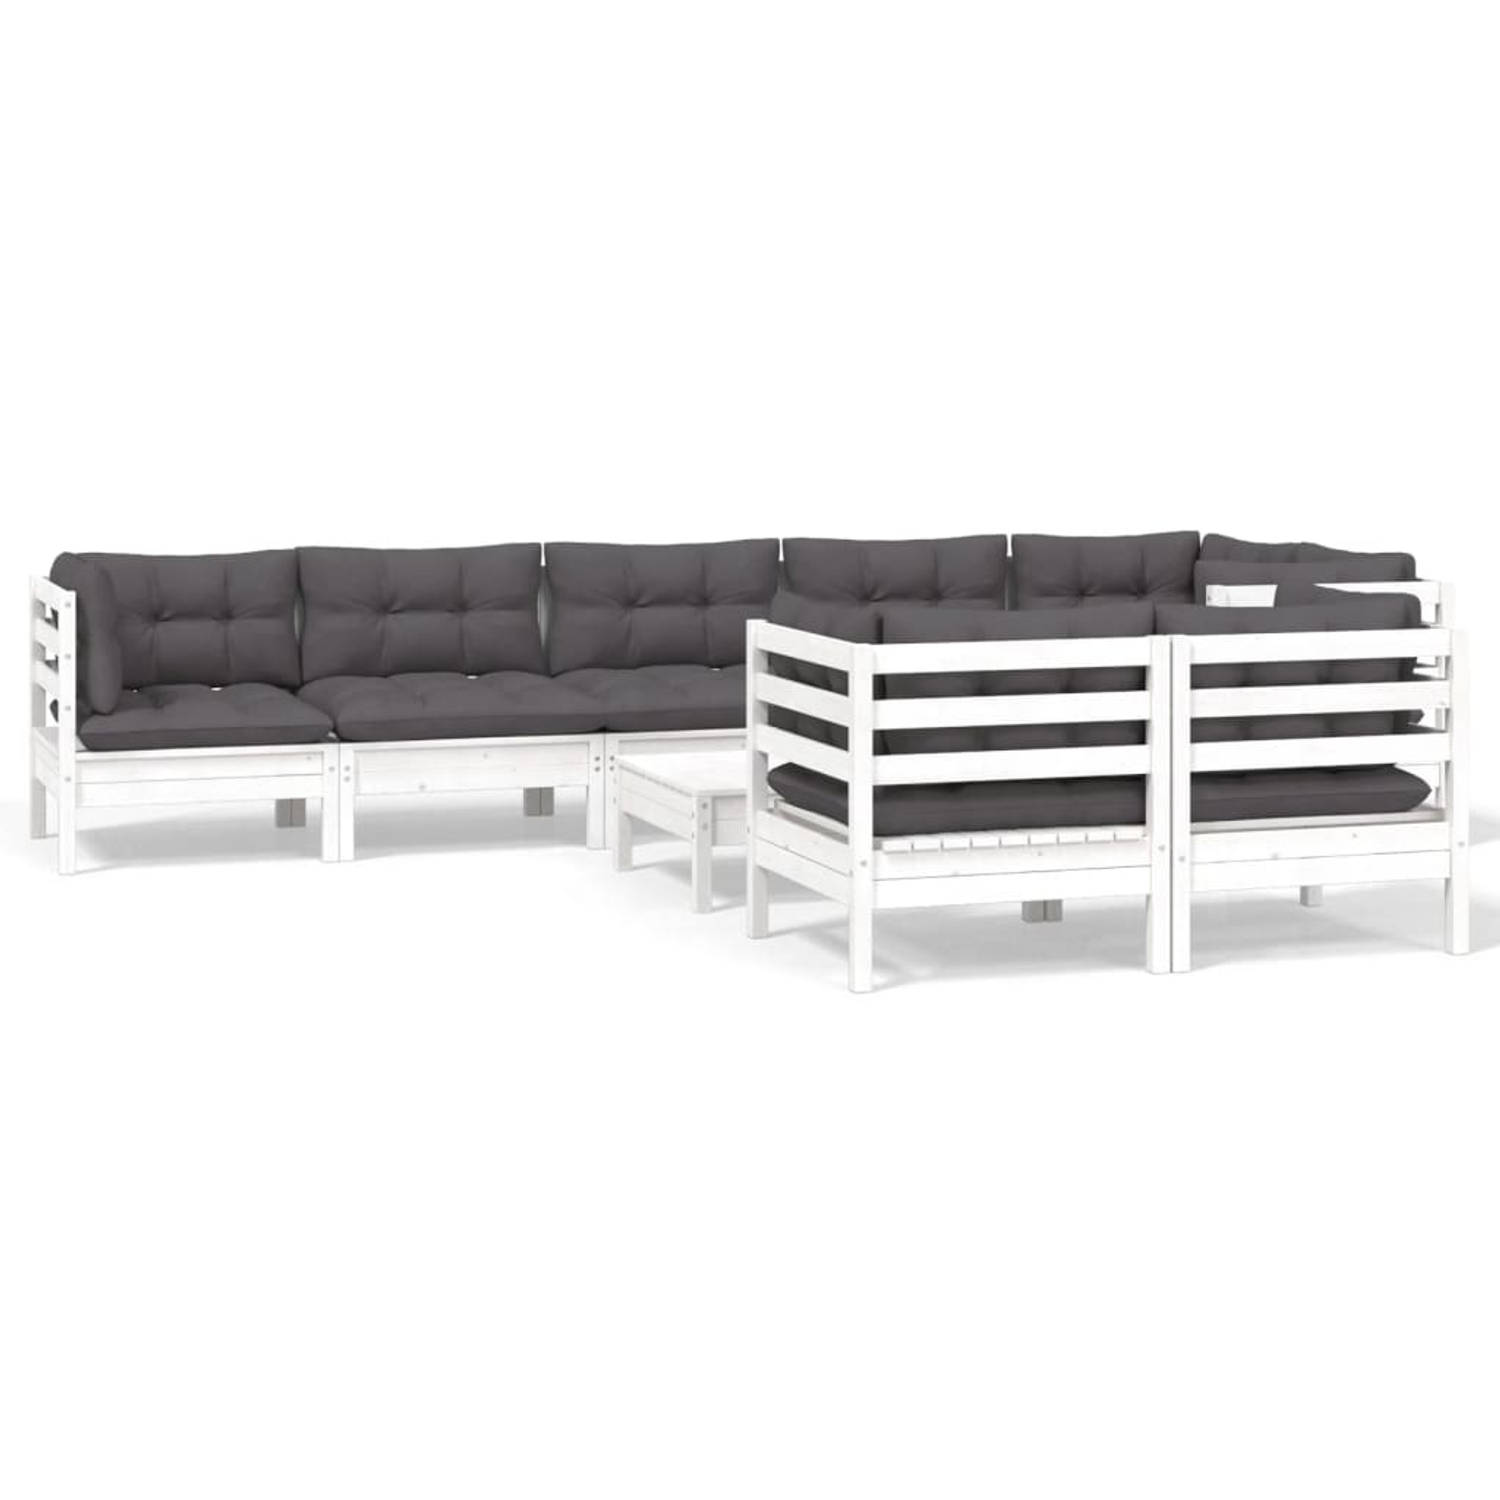 The Living Store Loungeset - Grenenhout - Wit - 9-zits - 63.5 x 63.5 x 62.5 cm - Antraciete Kussens